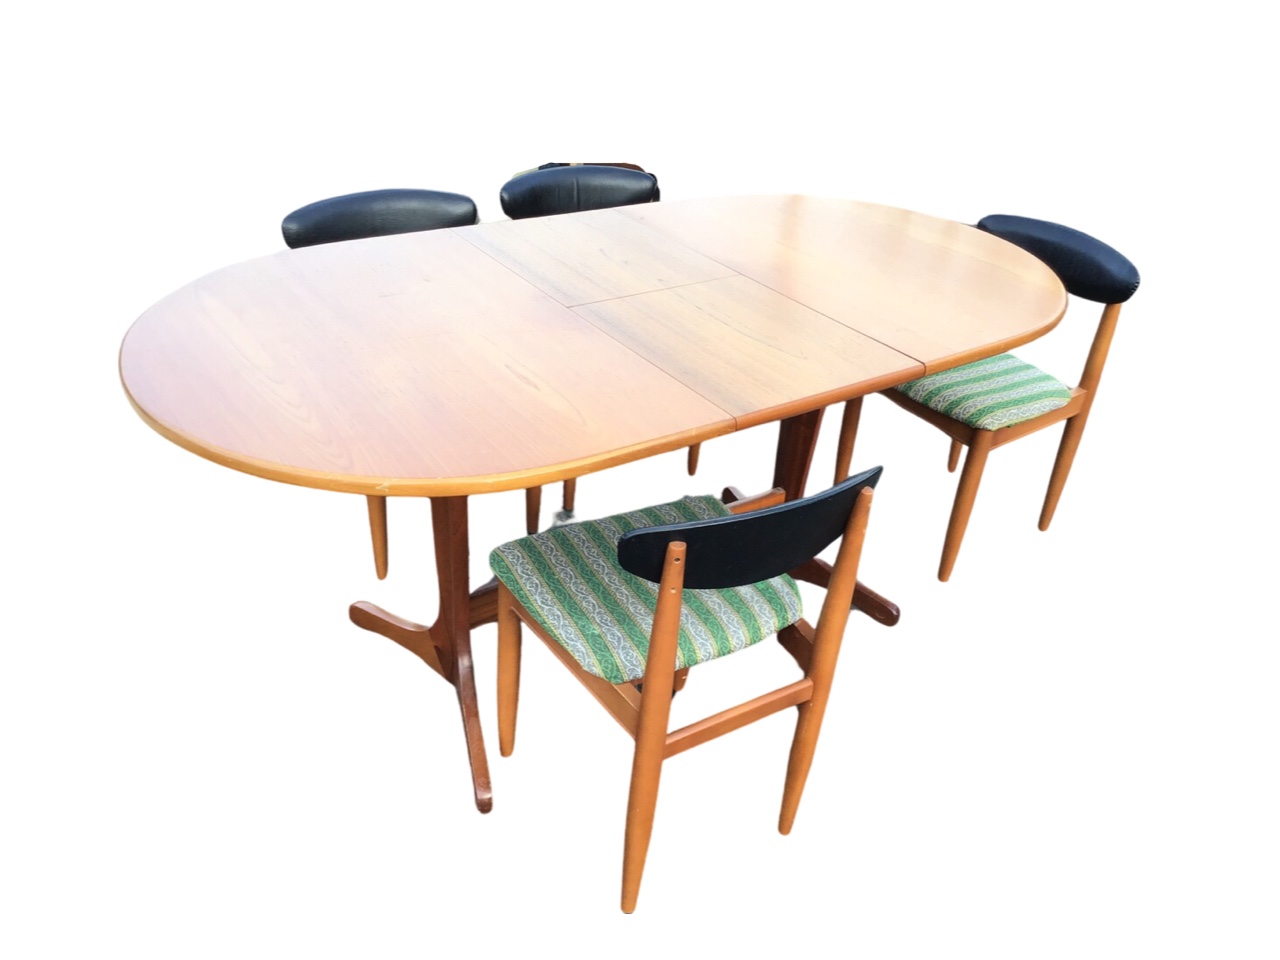 A 70s teak dining table and chair set by Sutcliffe Furniture, the oval top with integral leaf on - Image 2 of 3